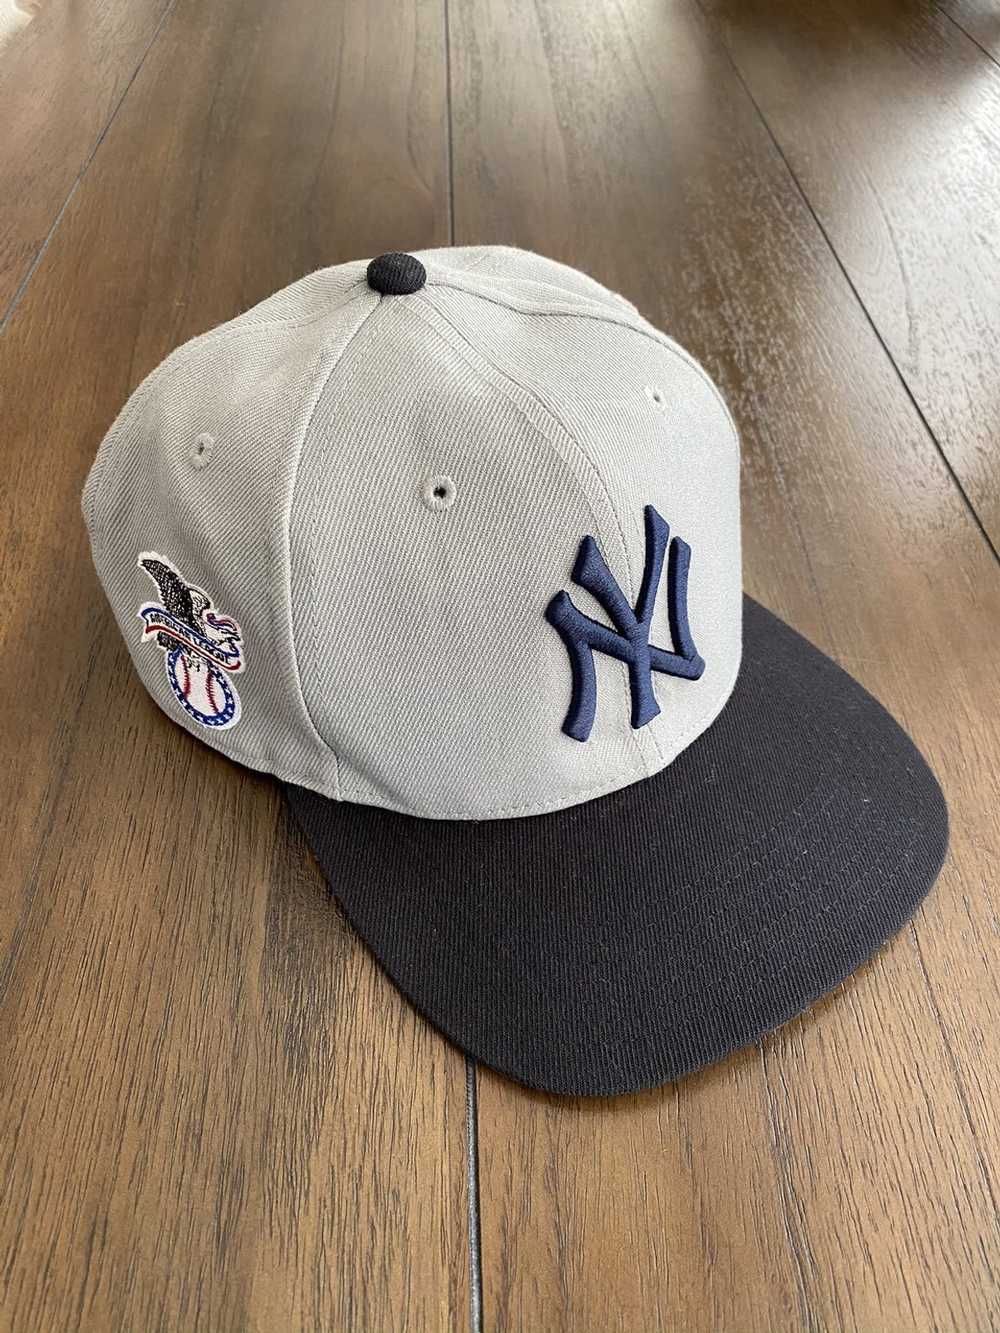 MLB Derek Jeter New York Yankees Tribute 59Fifty Fitted Hat Collection by  MLB x New Era